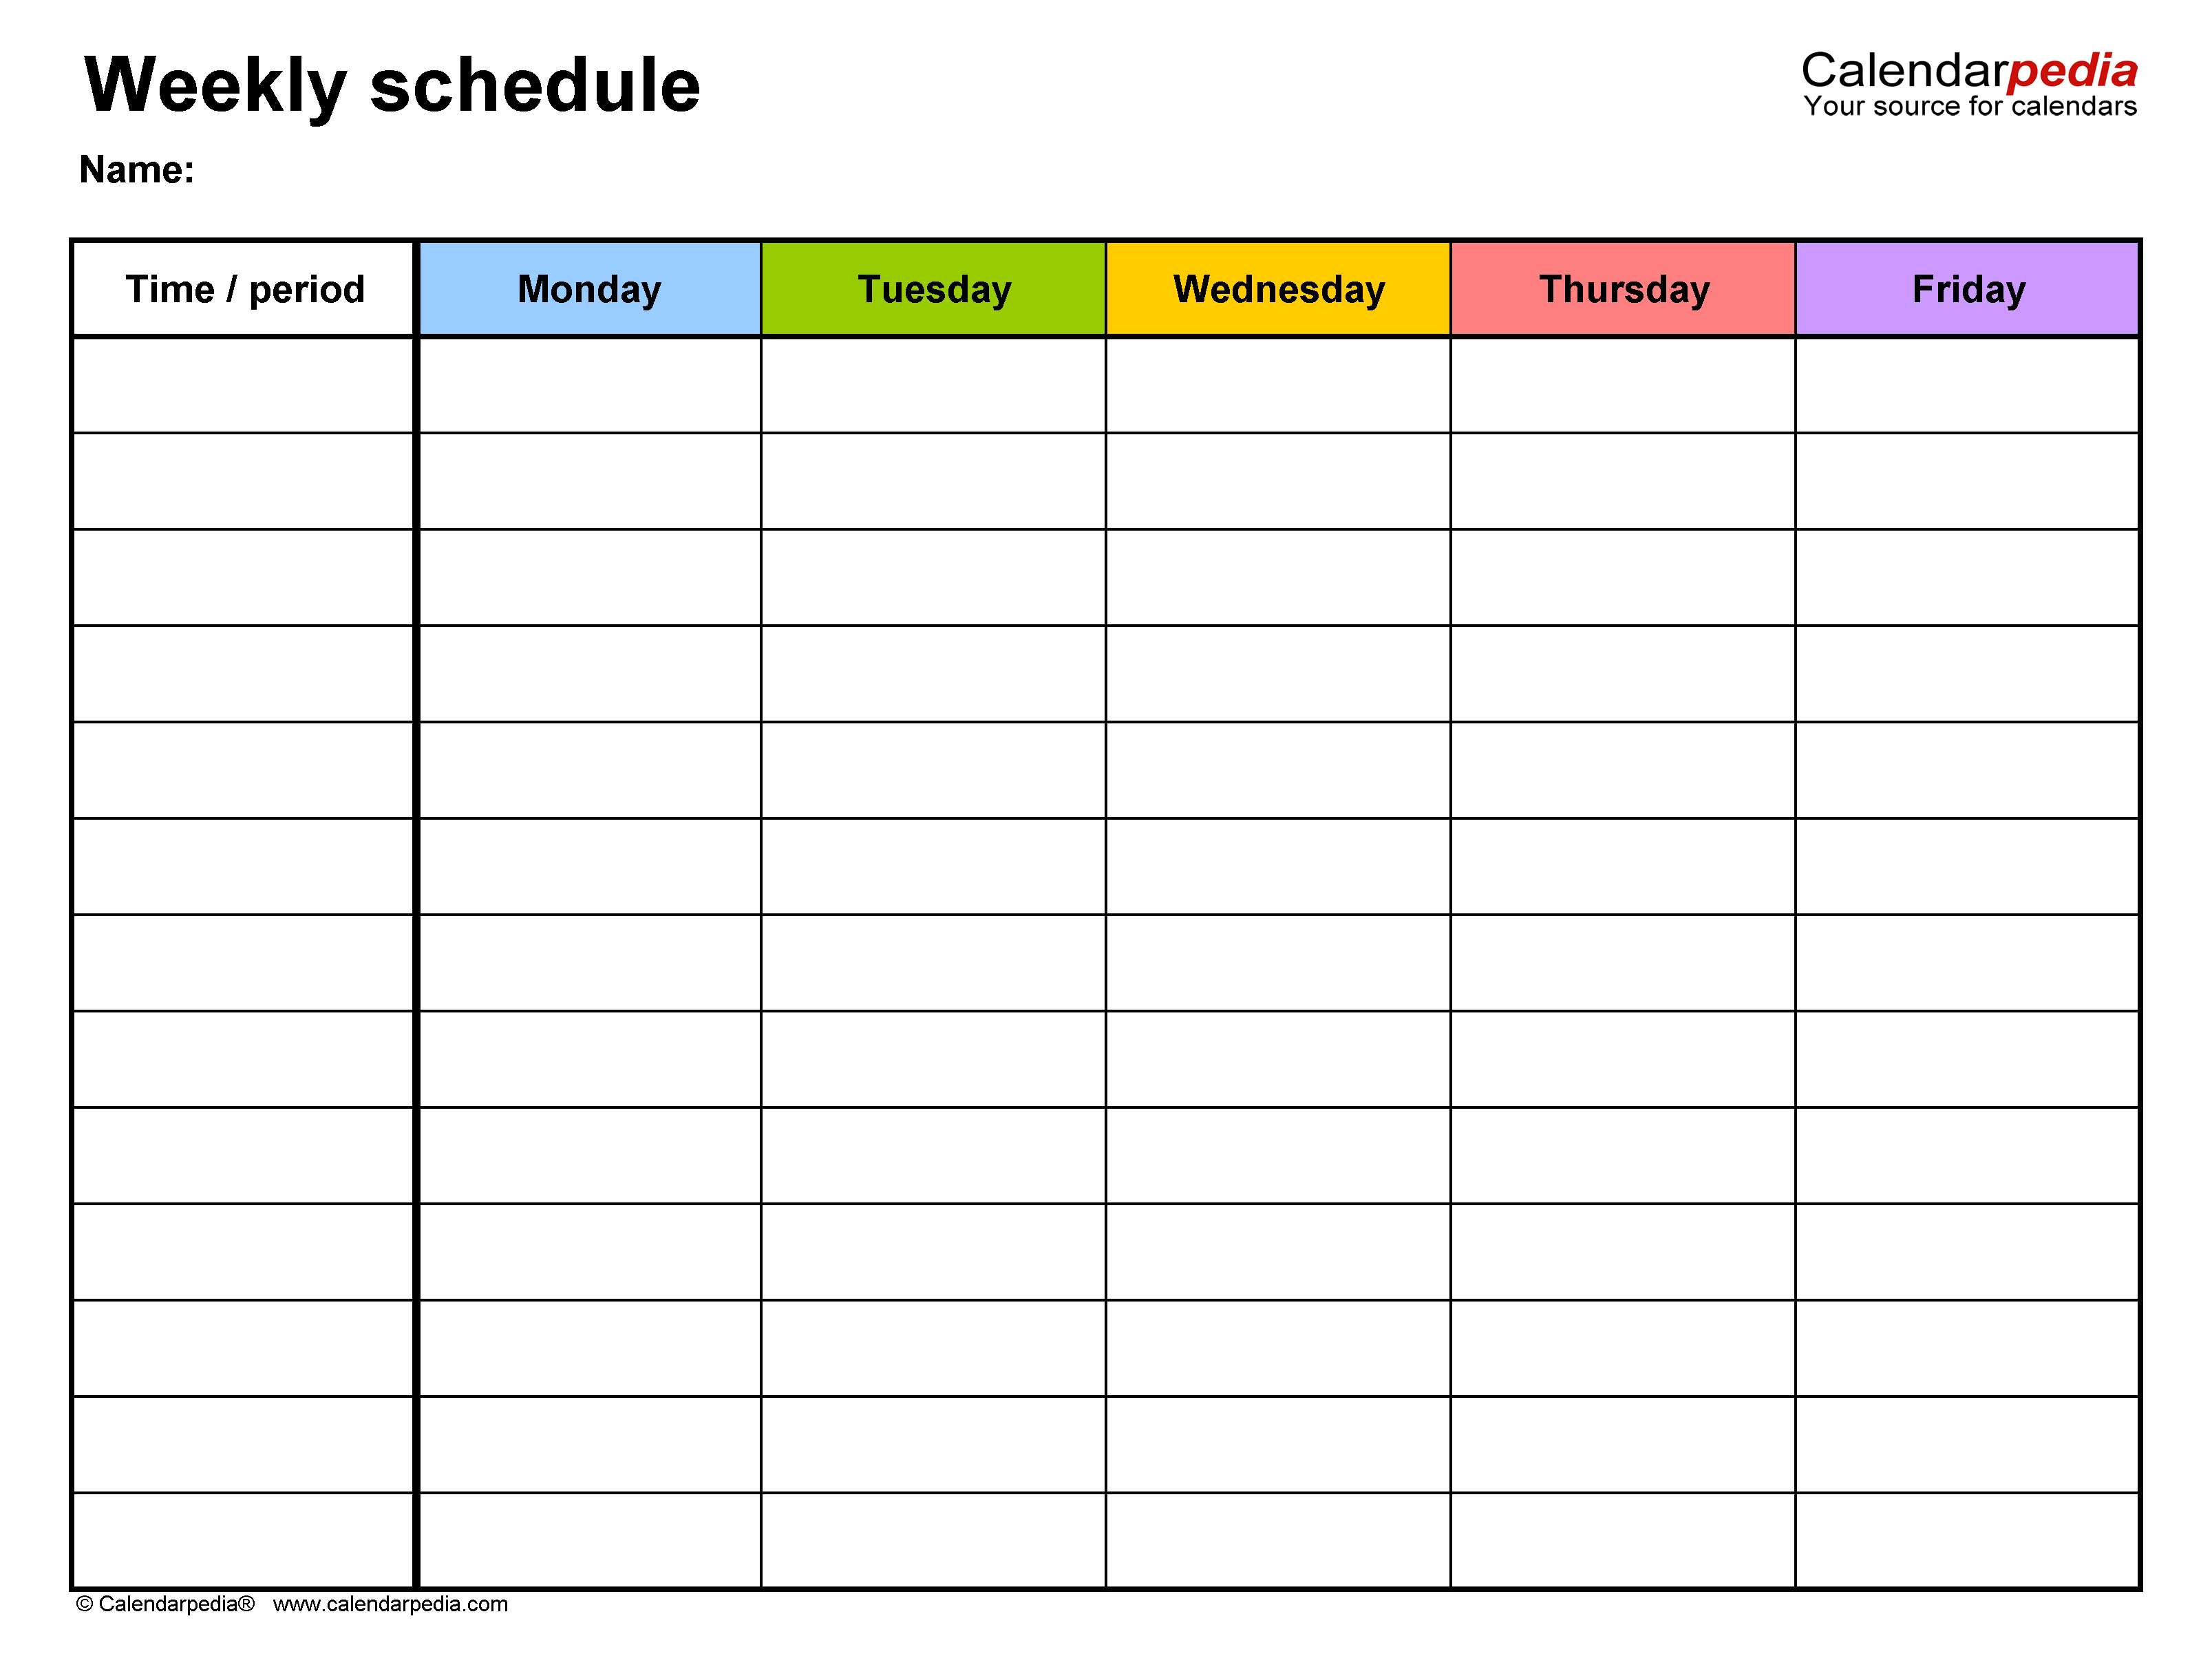 Free Weekly Schedules for Word - 10 Templates Throughout Blank Workout Schedule Template